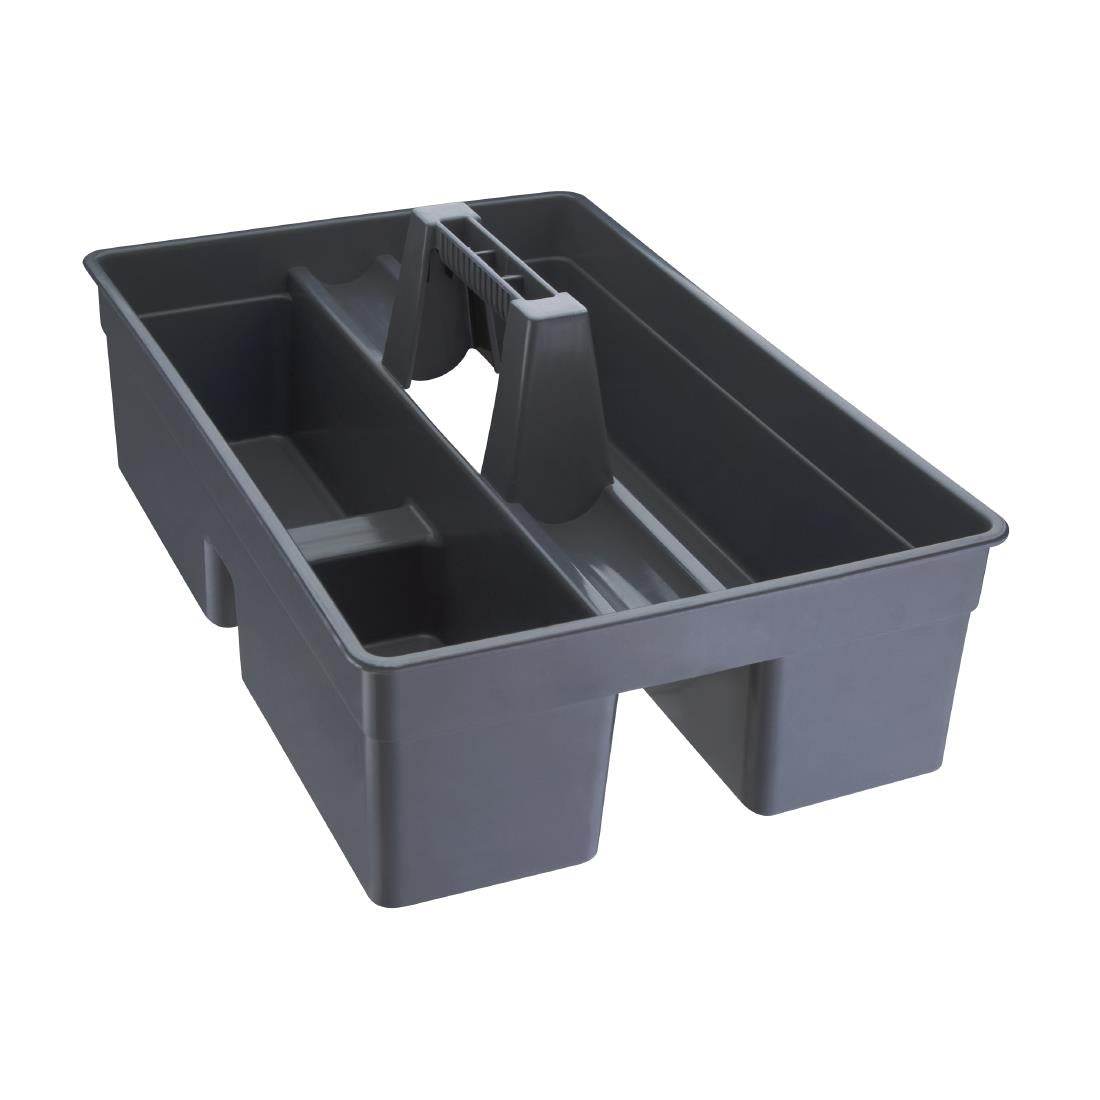 Jantex Carry Caddy JD Catering Equipment Solutions Ltd